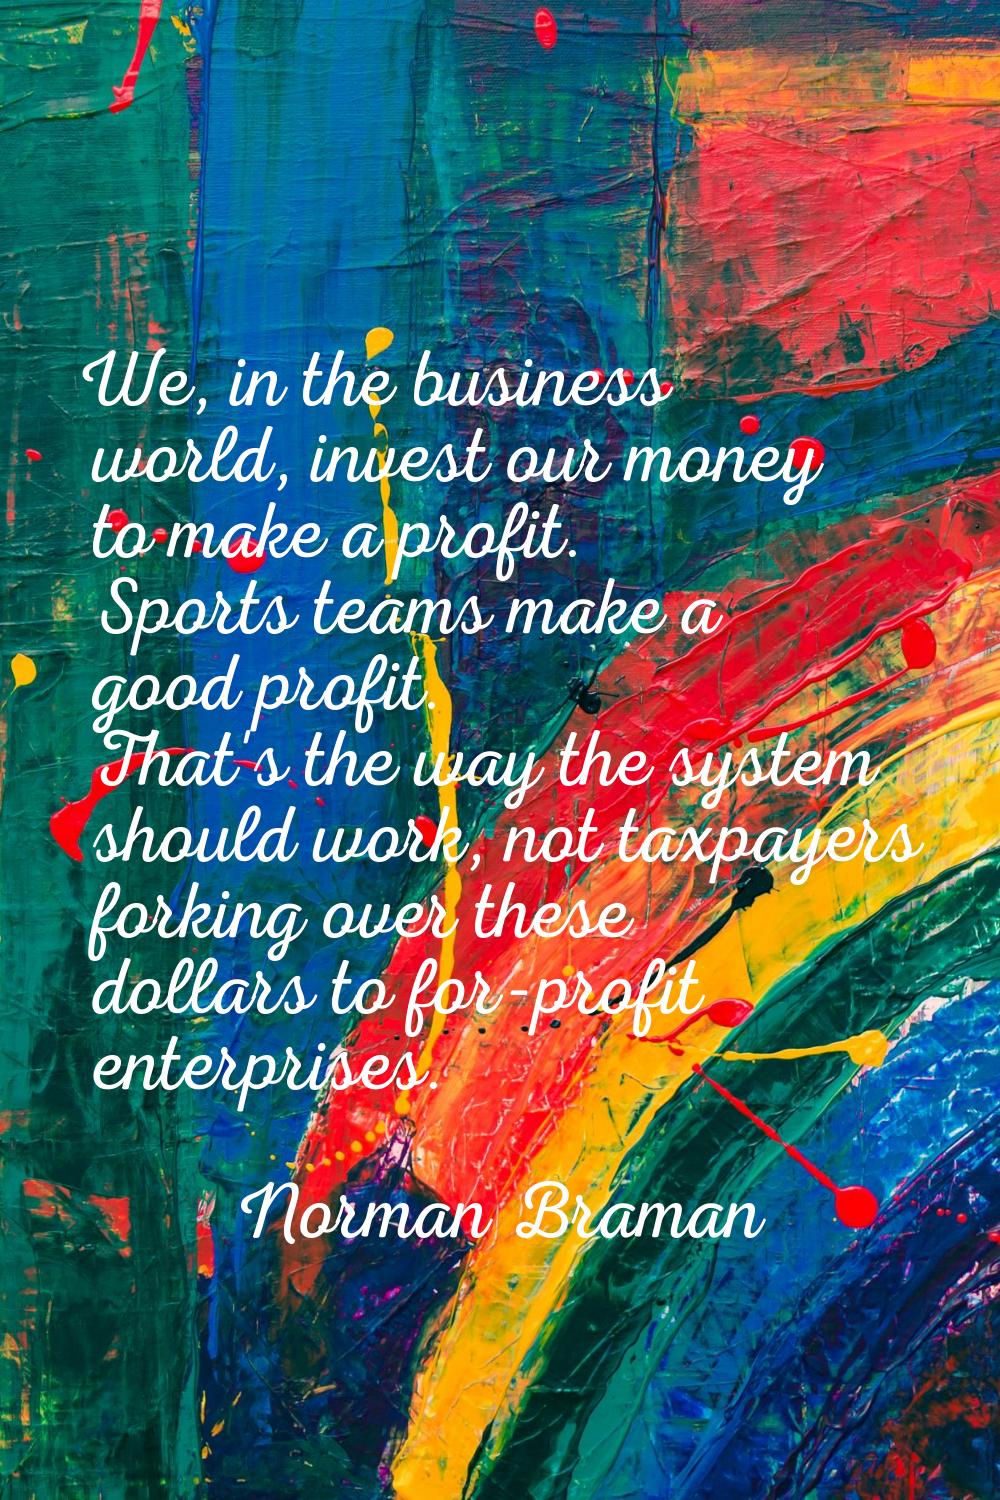 We, in the business world, invest our money to make a profit. Sports teams make a good profit. That